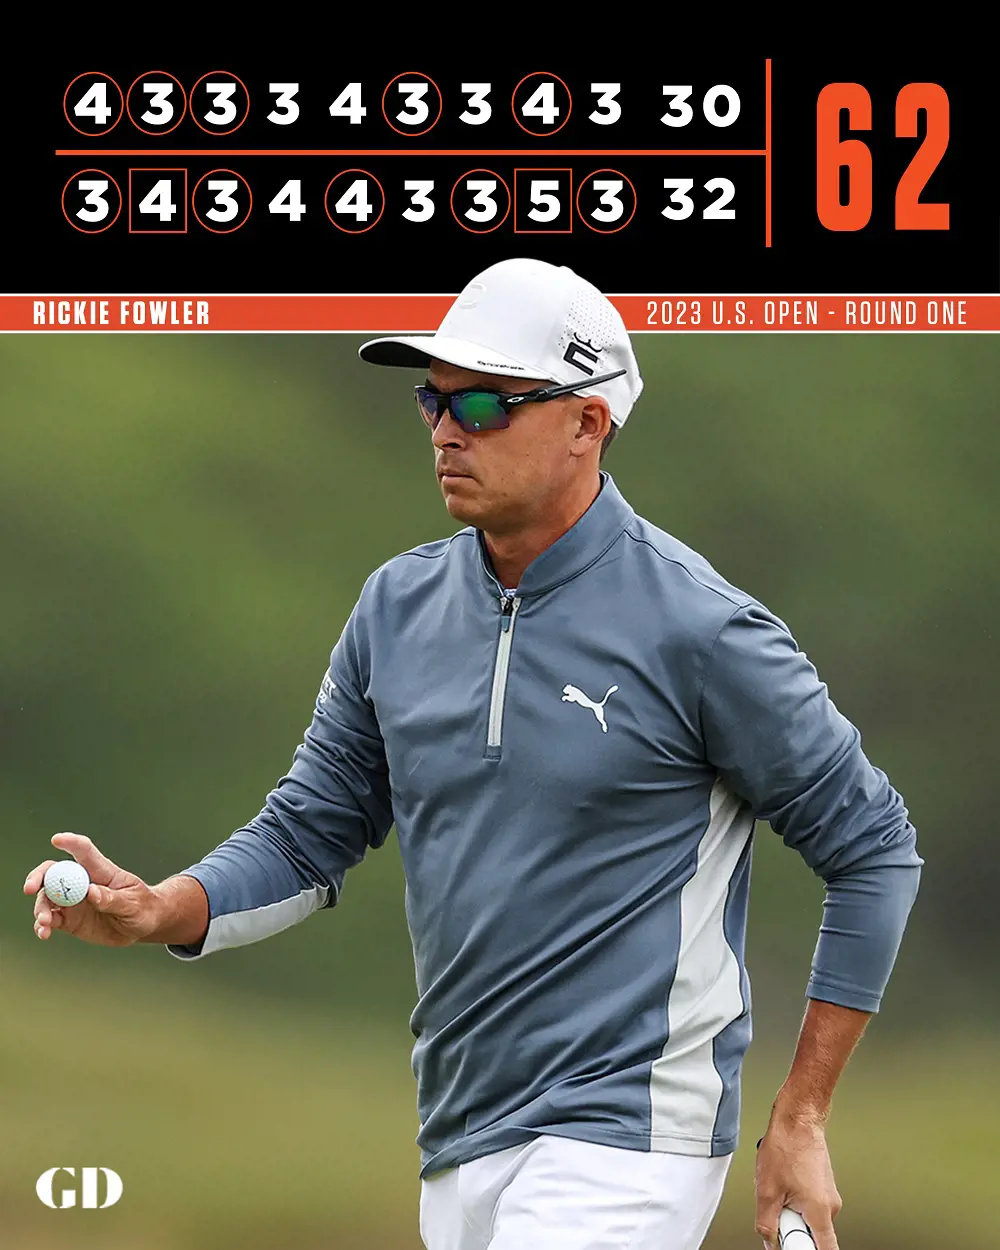 Rickie is currently leading in the ongoing U.S. Open 2023 [credit: Golf Digest]